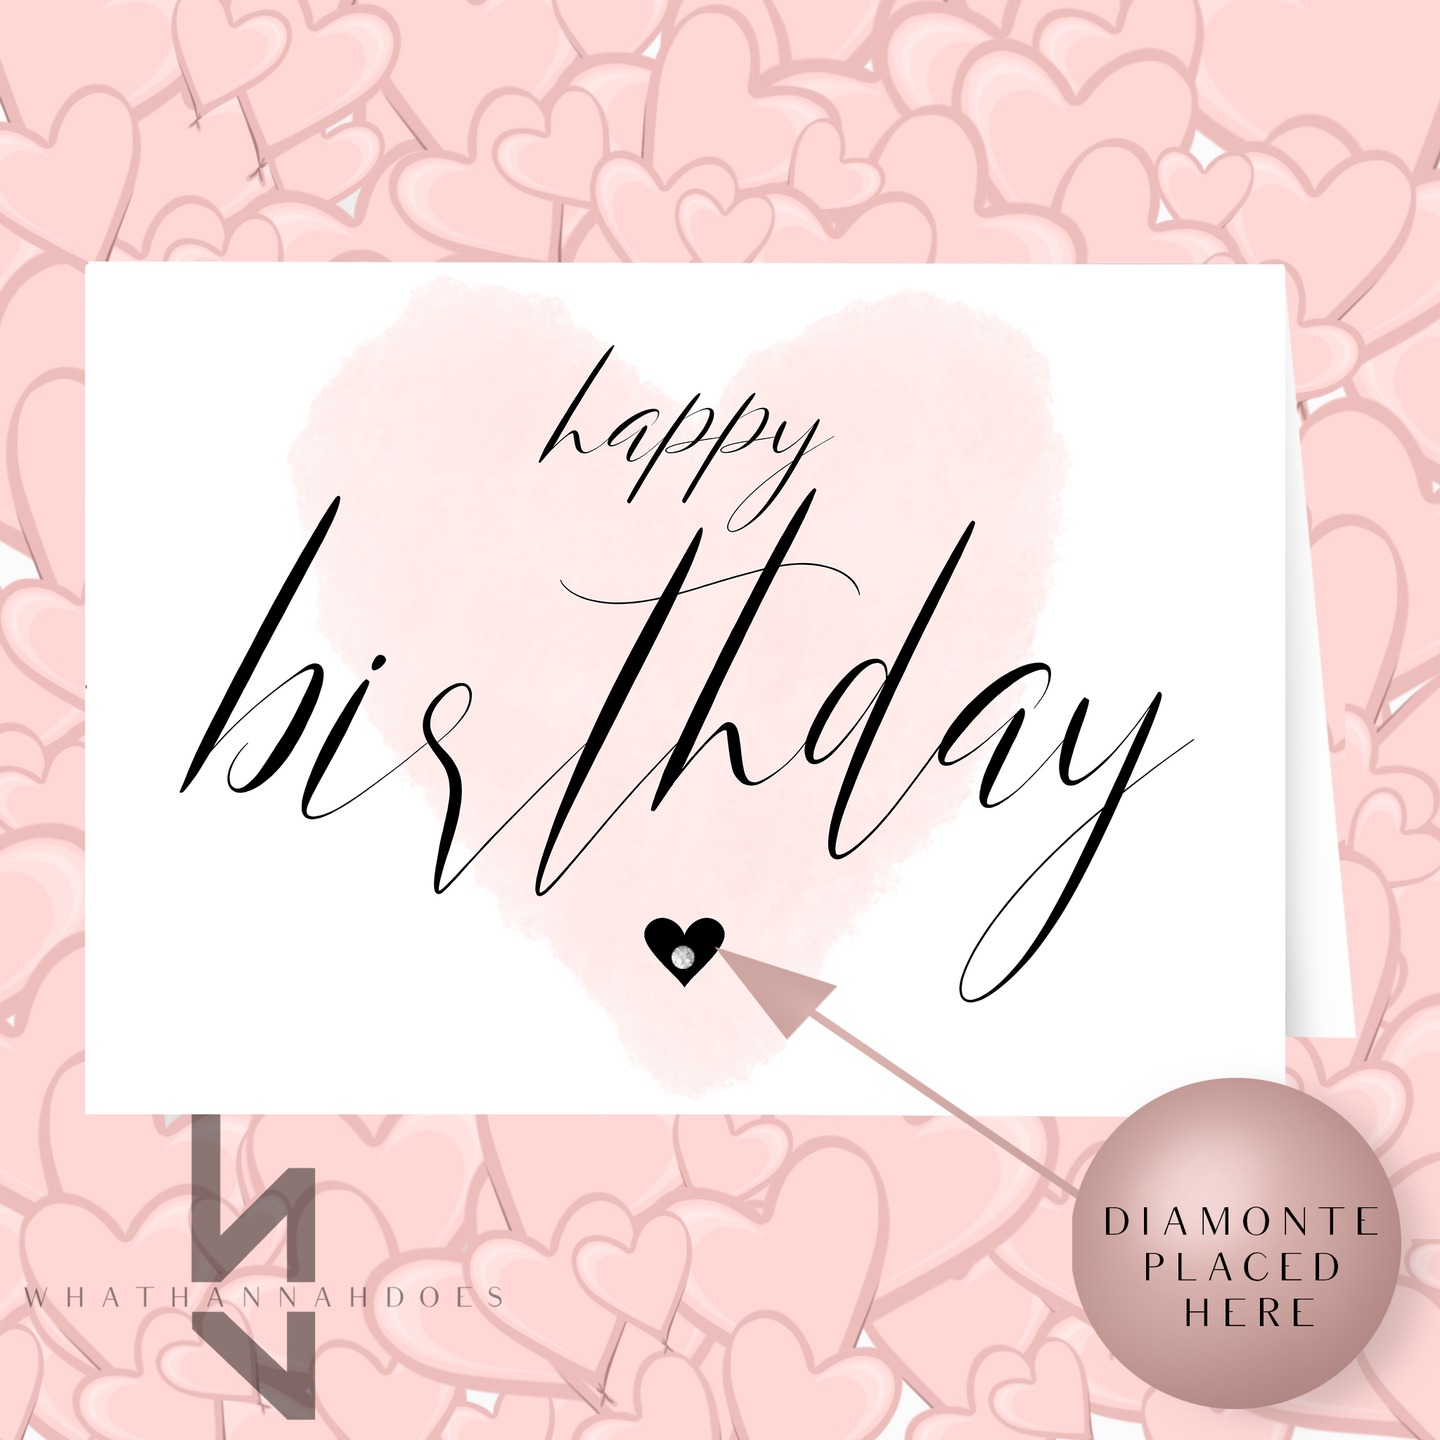 Happy Birthday A5 Card With Diamonte Heart